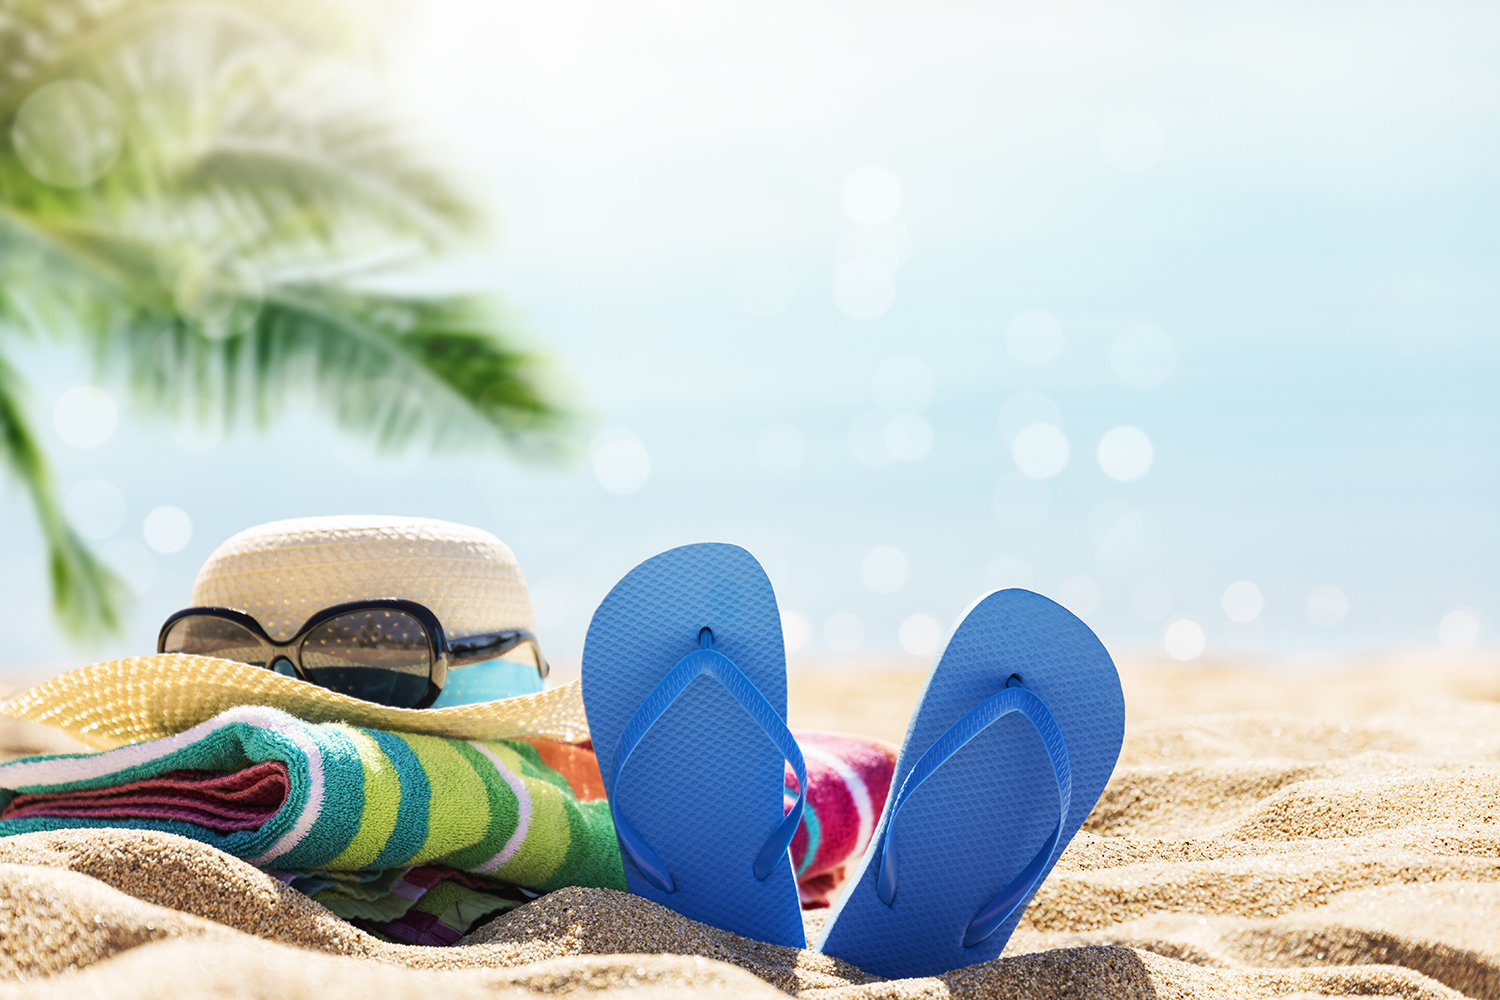 Staycation image of flip flops hat and sunglasses on a sandy beach